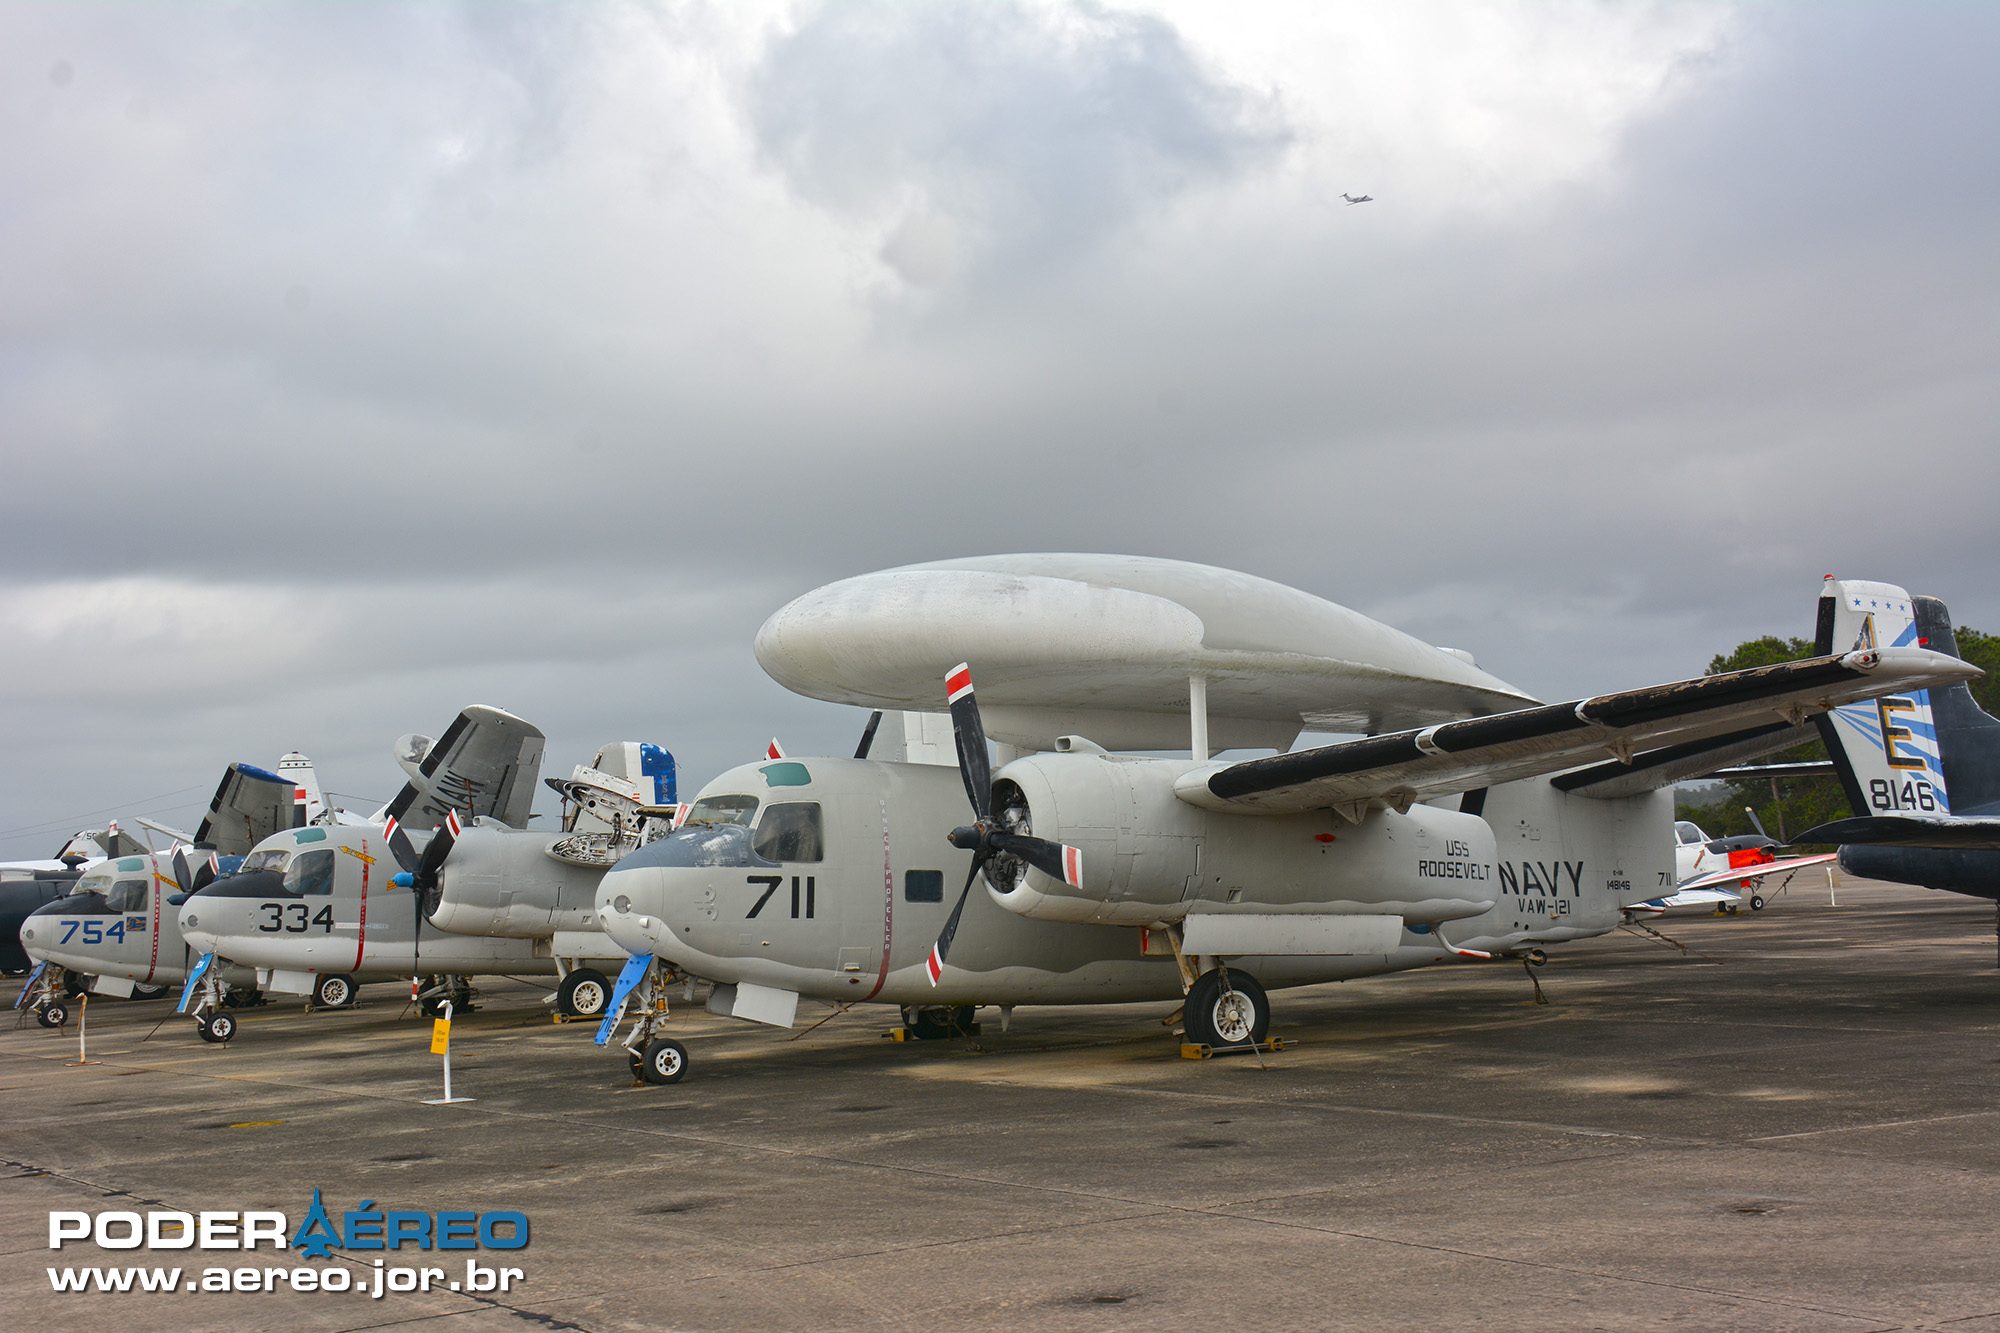 national-naval-aviation-museum-4